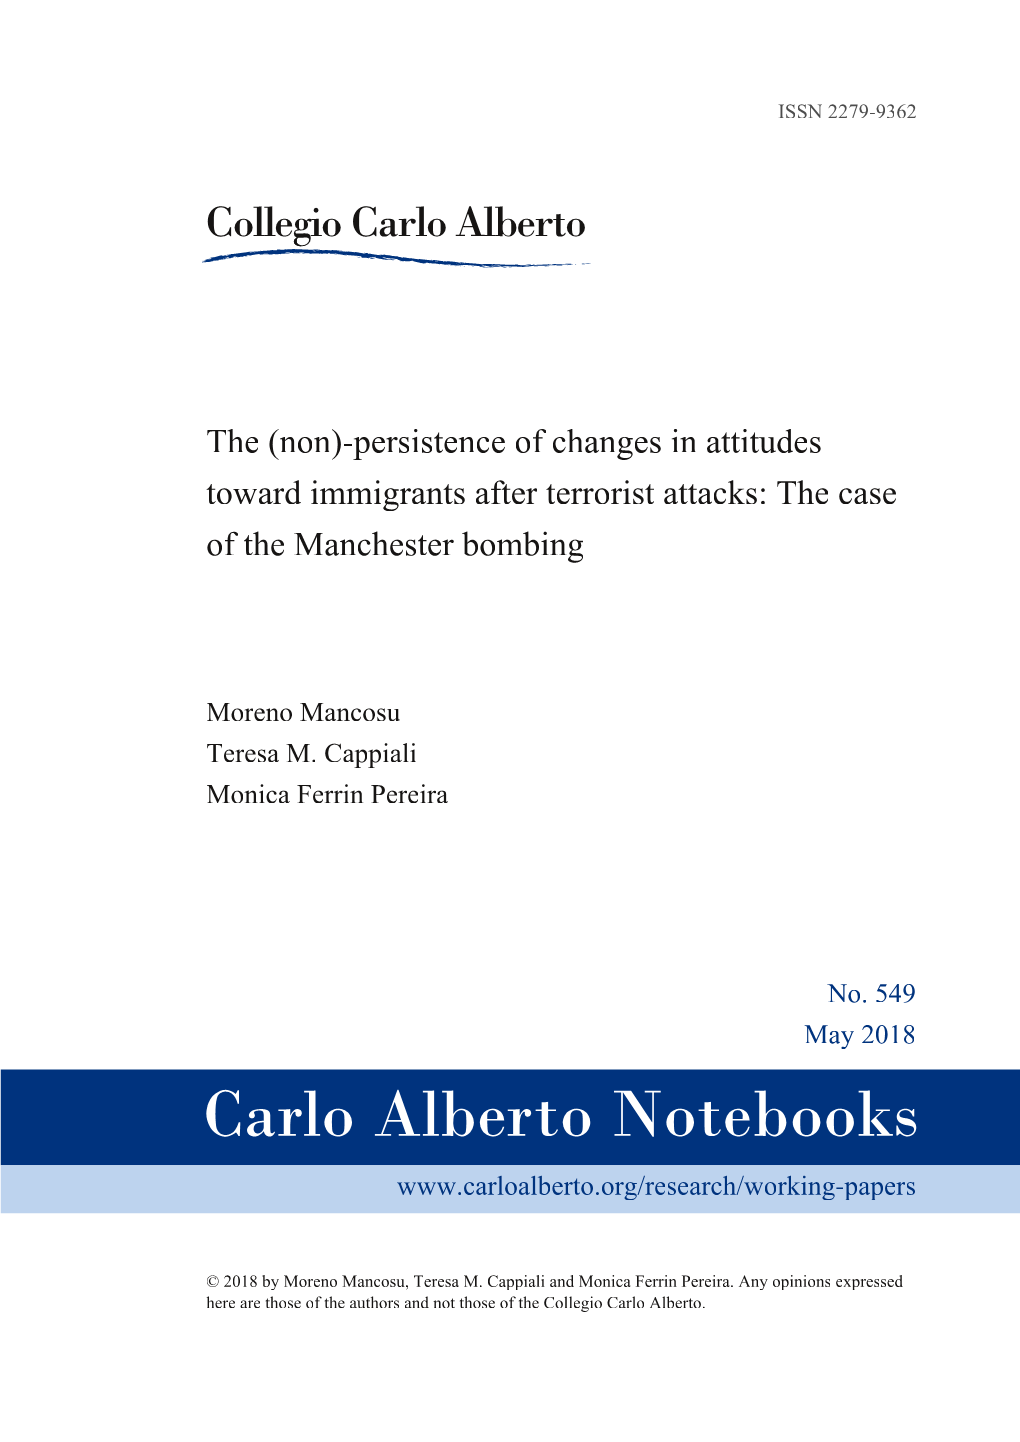 Persistence of Changes in Attitudes Toward Immigrants After Terrorist Attacks: the Case of the Manchester Bombing Moreno Mancosu Teresa M